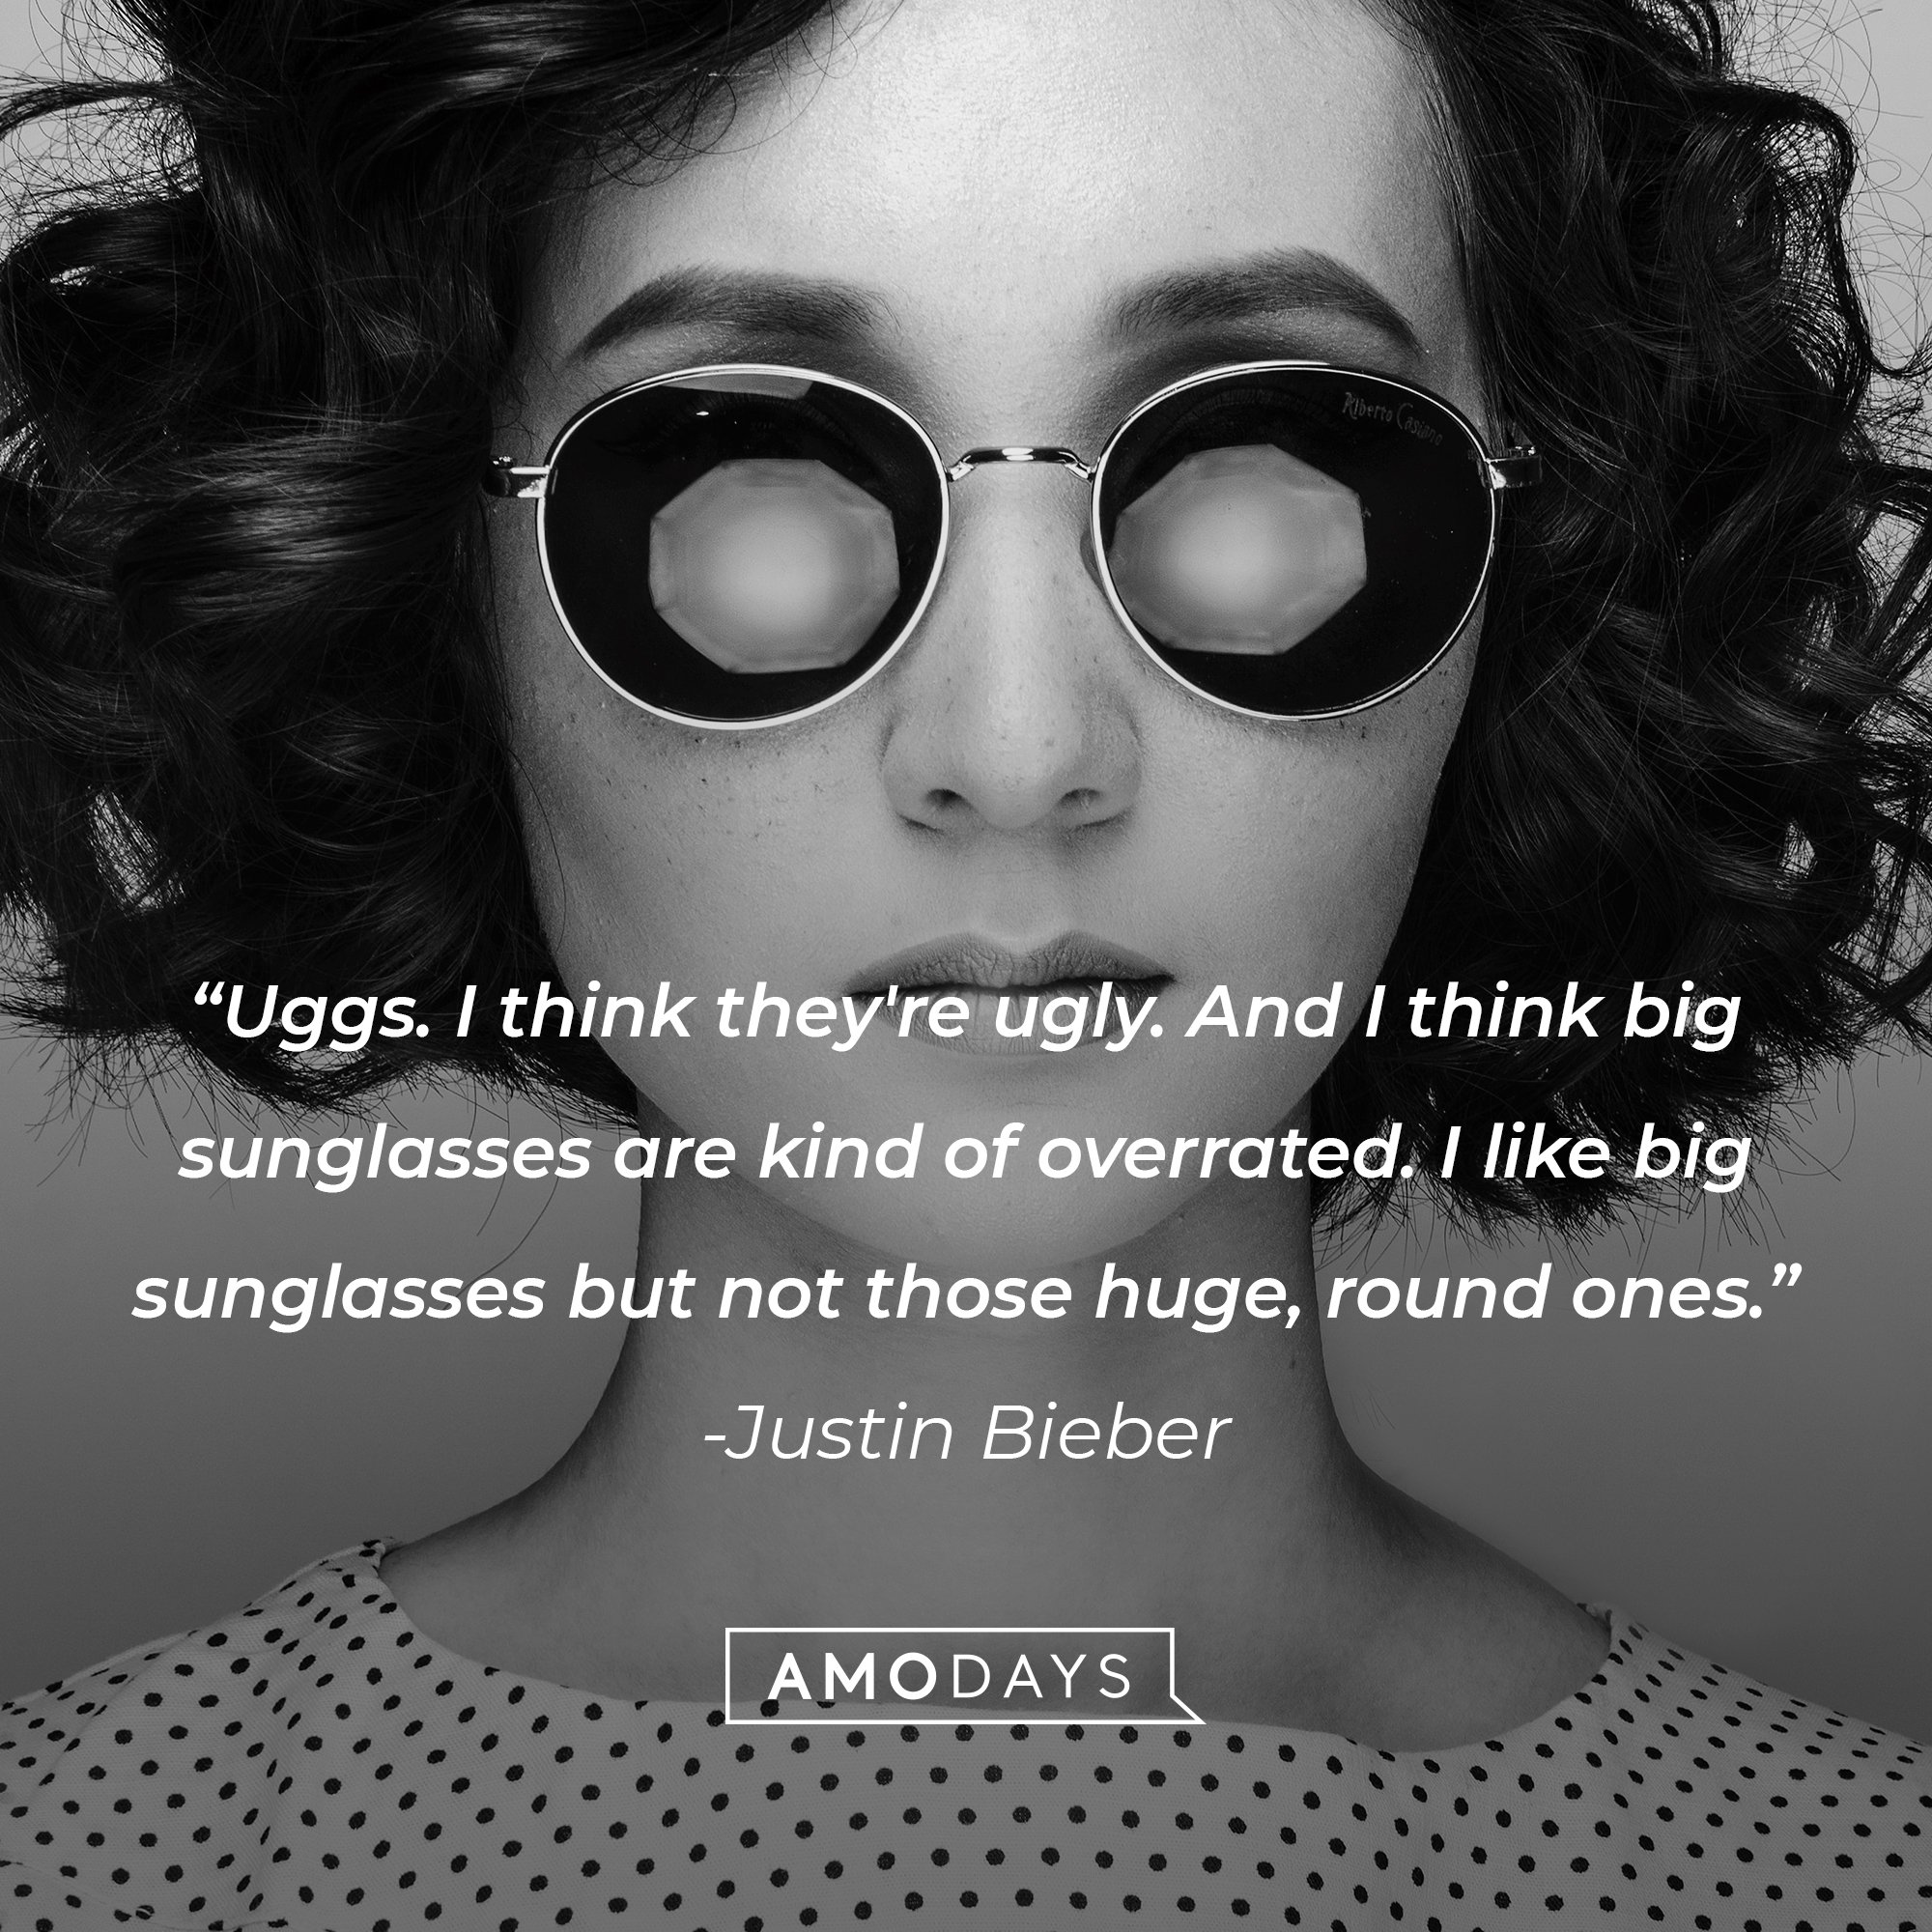 Justin Bieber’s quote: "Uggs. I think they're ugly. And I think big sunglasses are kind of overrated. I like big sunglasses but not those huge, round ones." | Image: AmoDays 